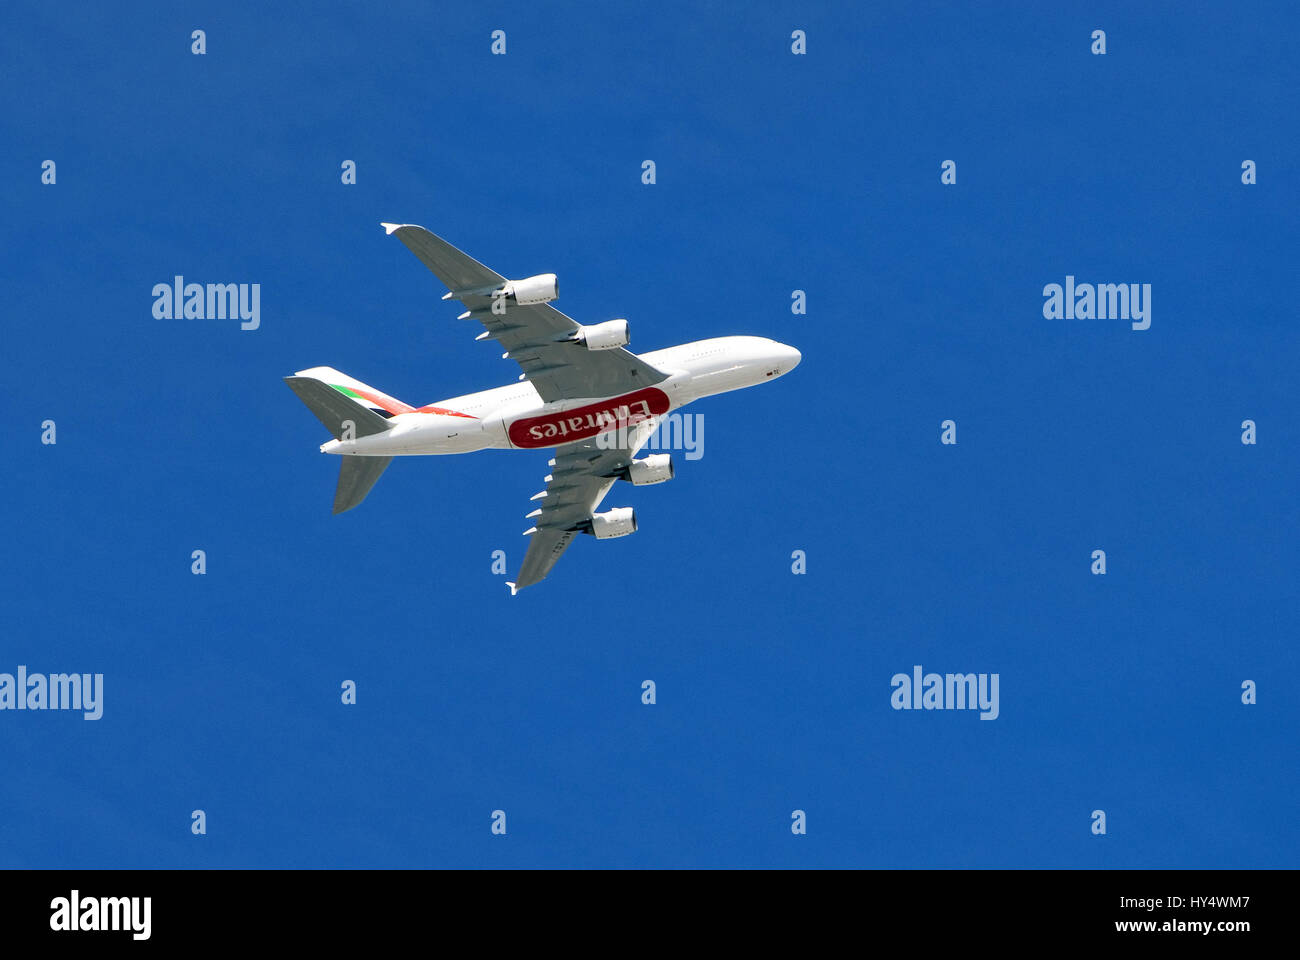 Airbus A 380 of the emirate Airlines over Hamburg, Airbus A 380 der Emirates Airlines ueber Hamburg Stock Photo